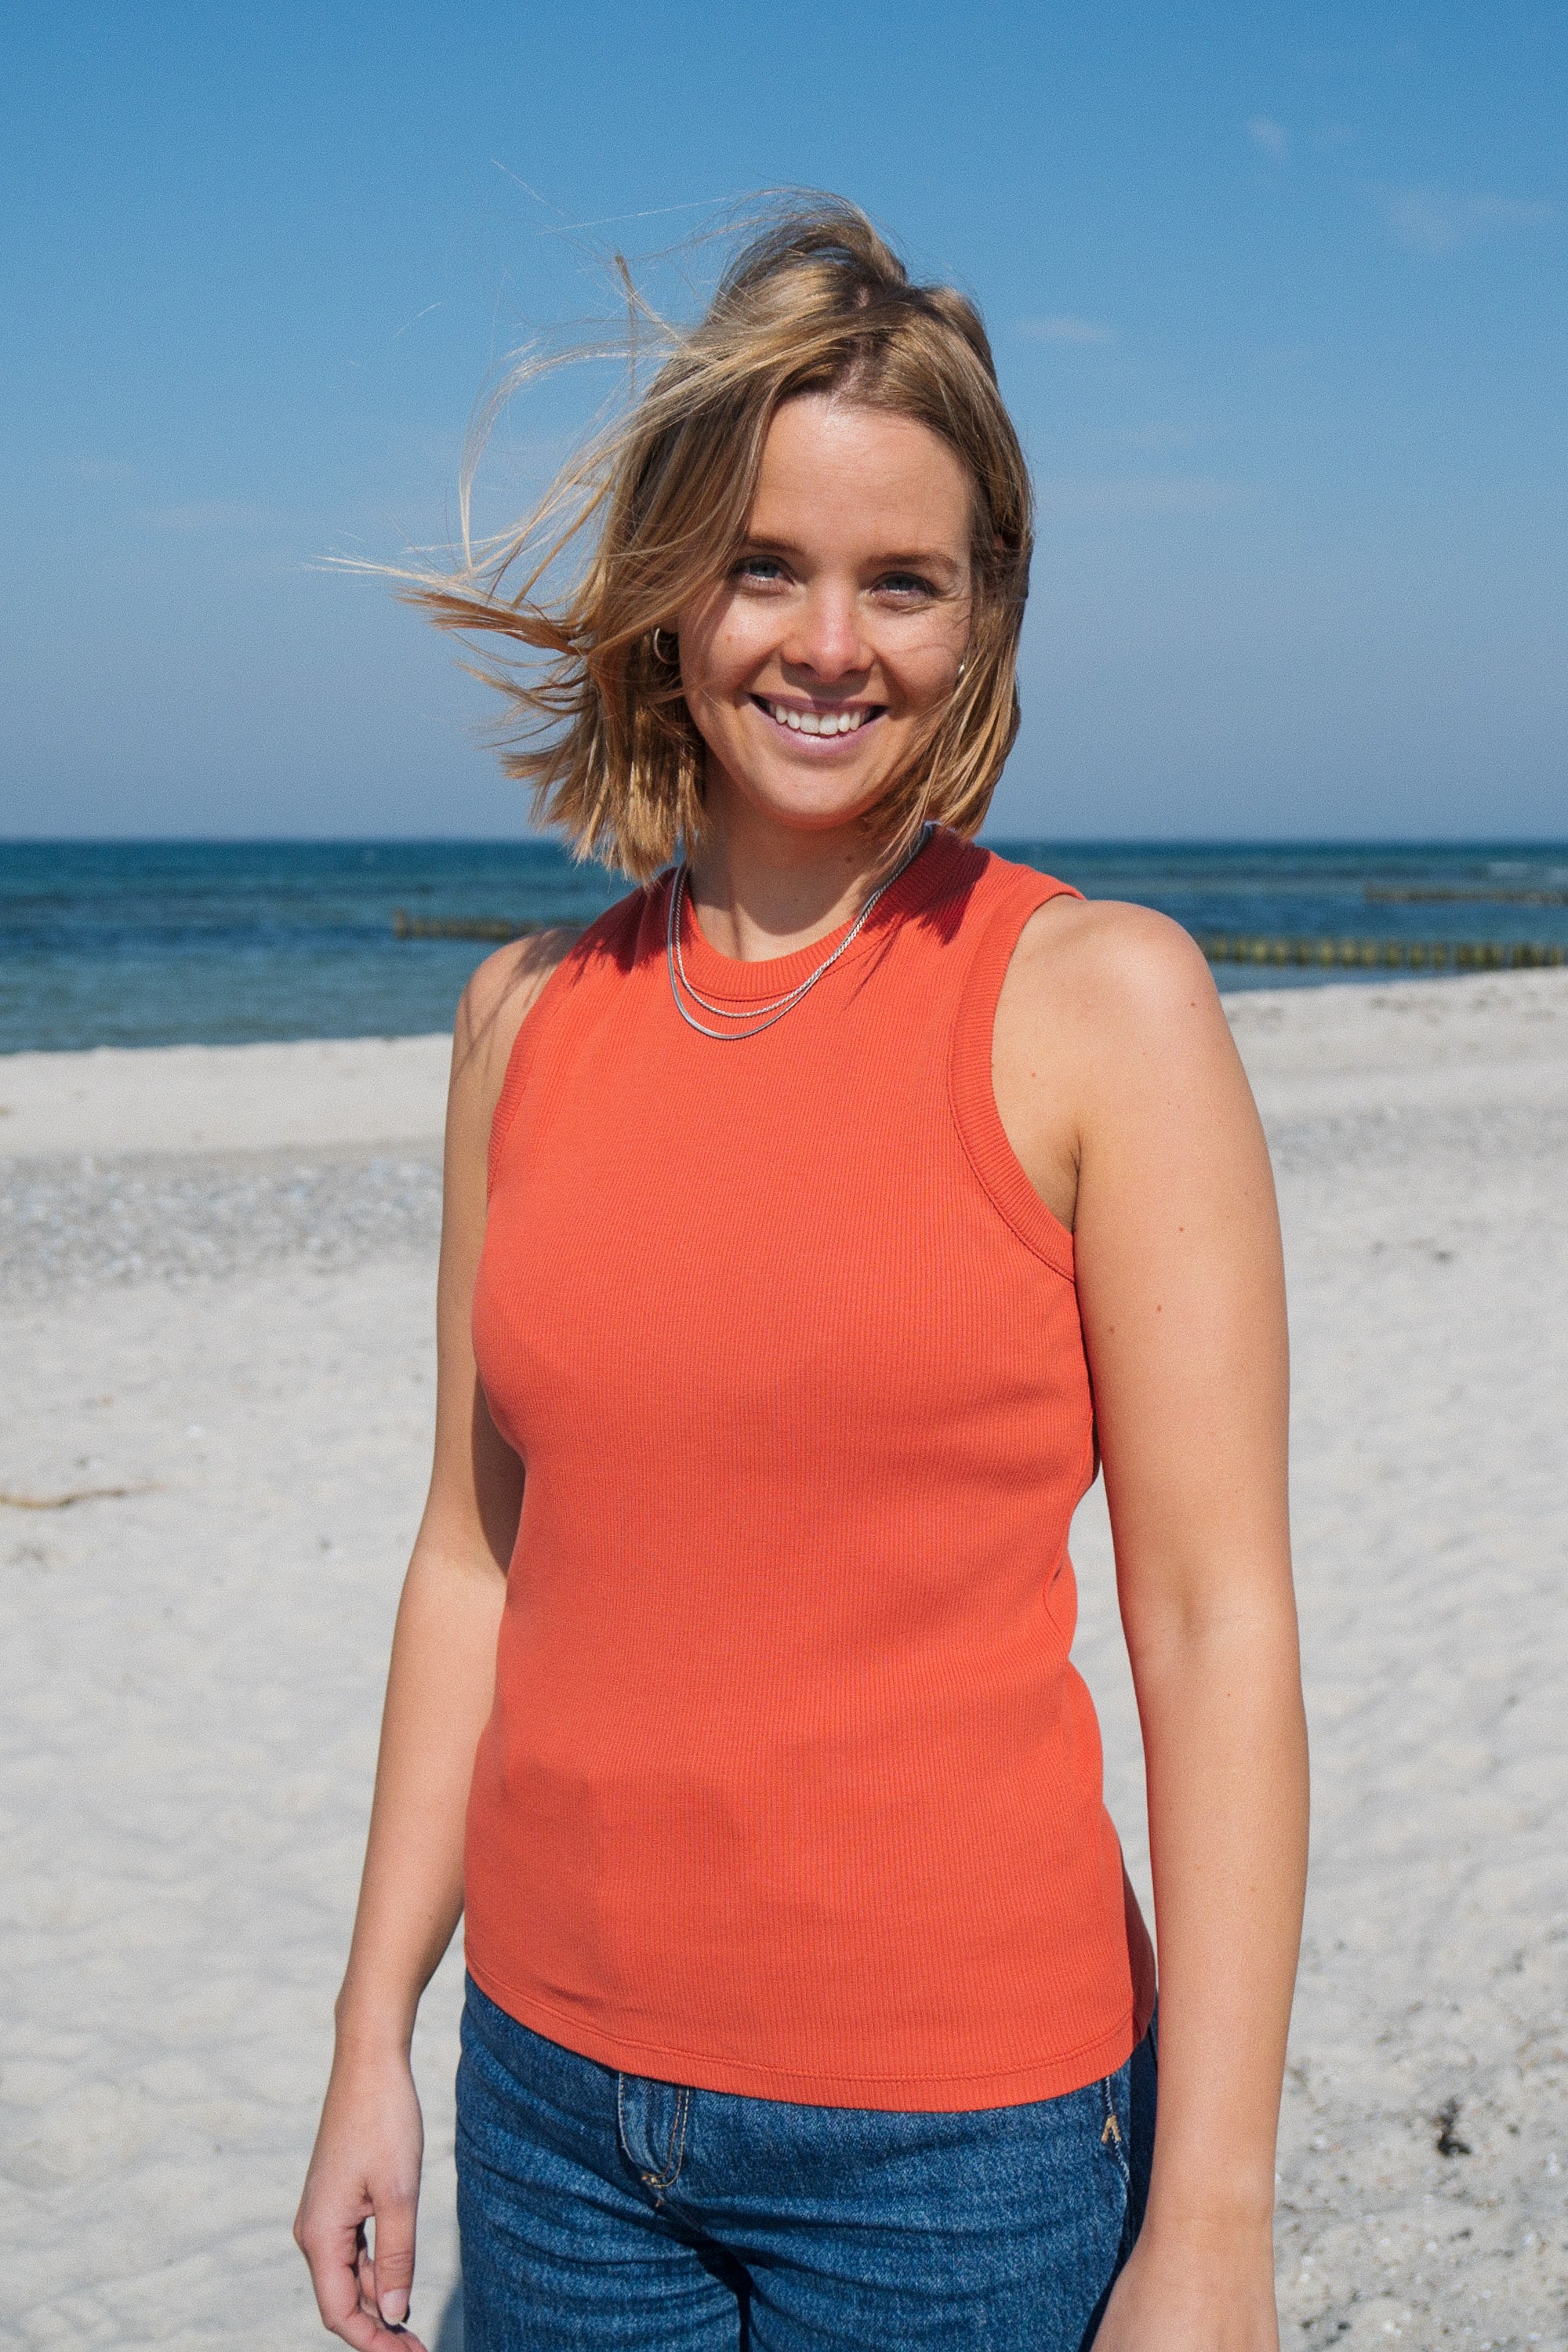 Top Alva Orange by Saltwater made from organic cotton